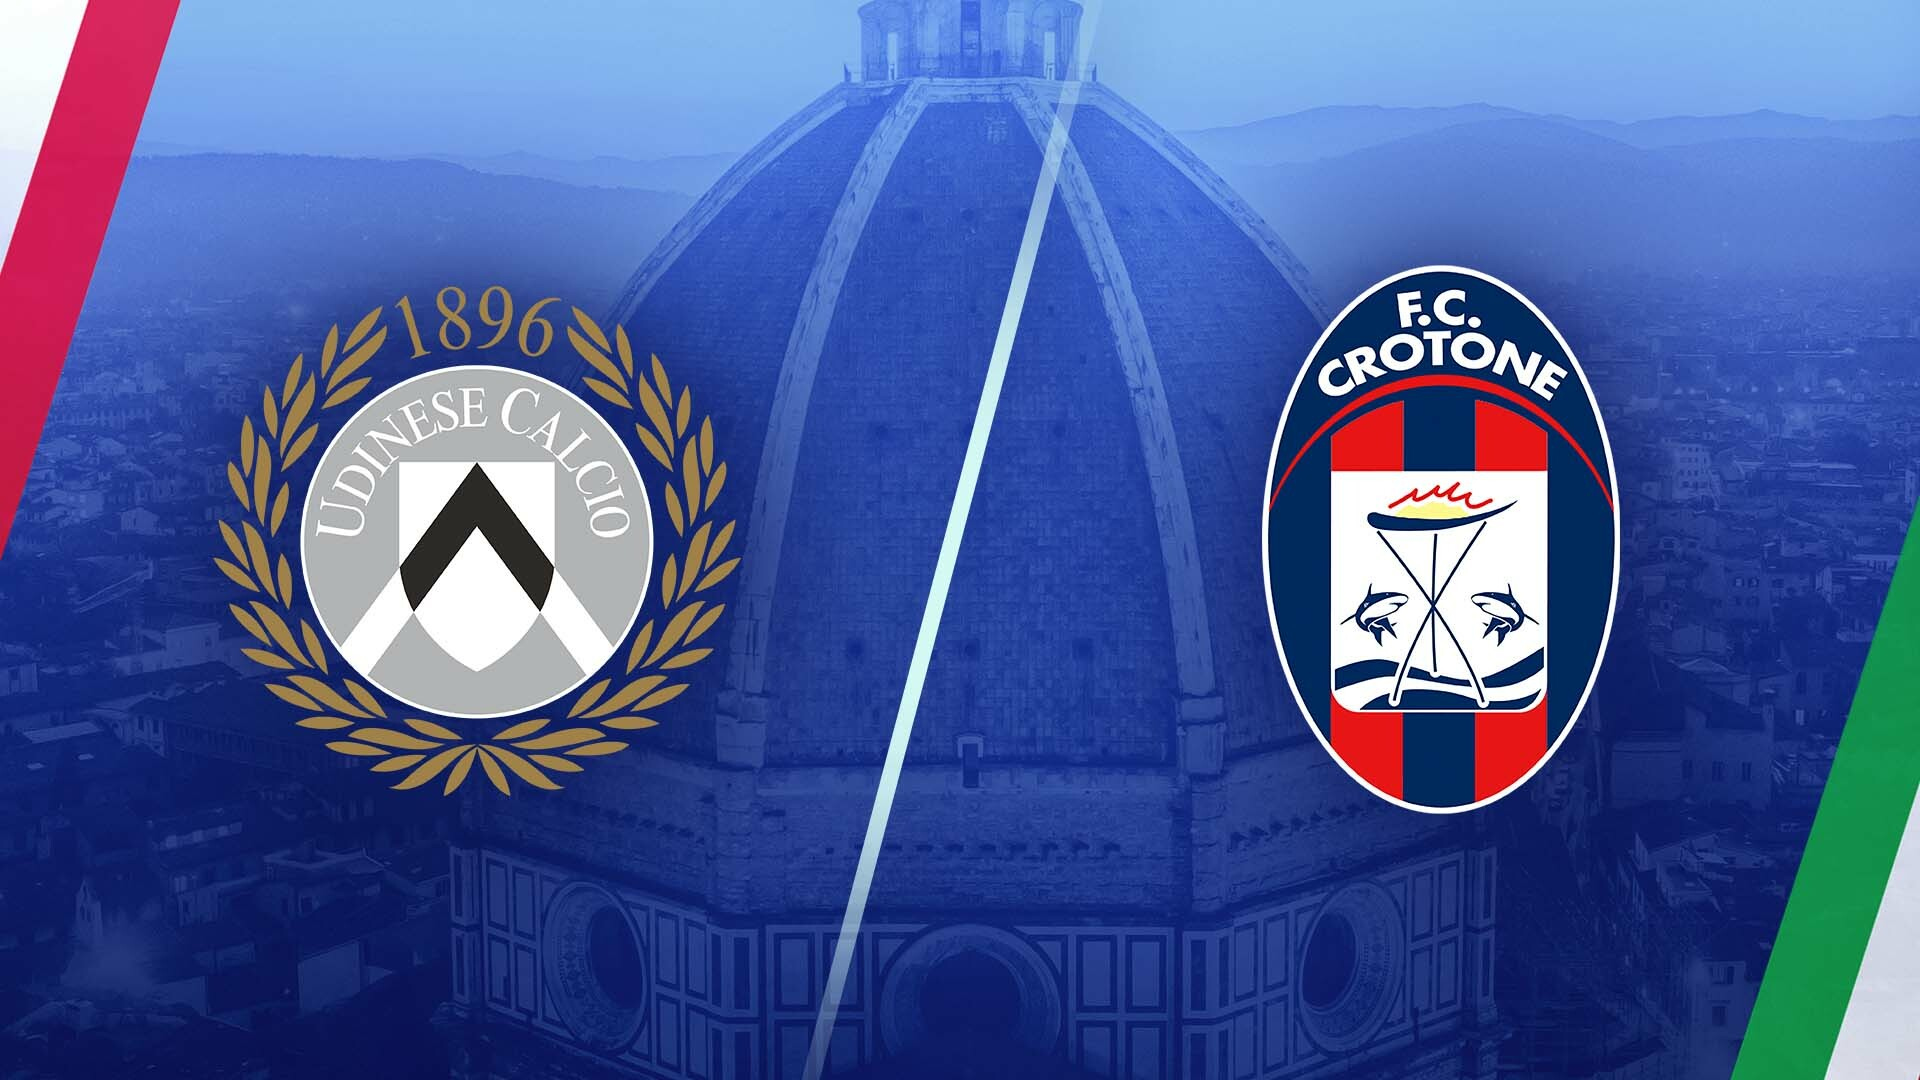 Watch Serie A: Udinese vs. Crotone - Full show on Paramount Plus